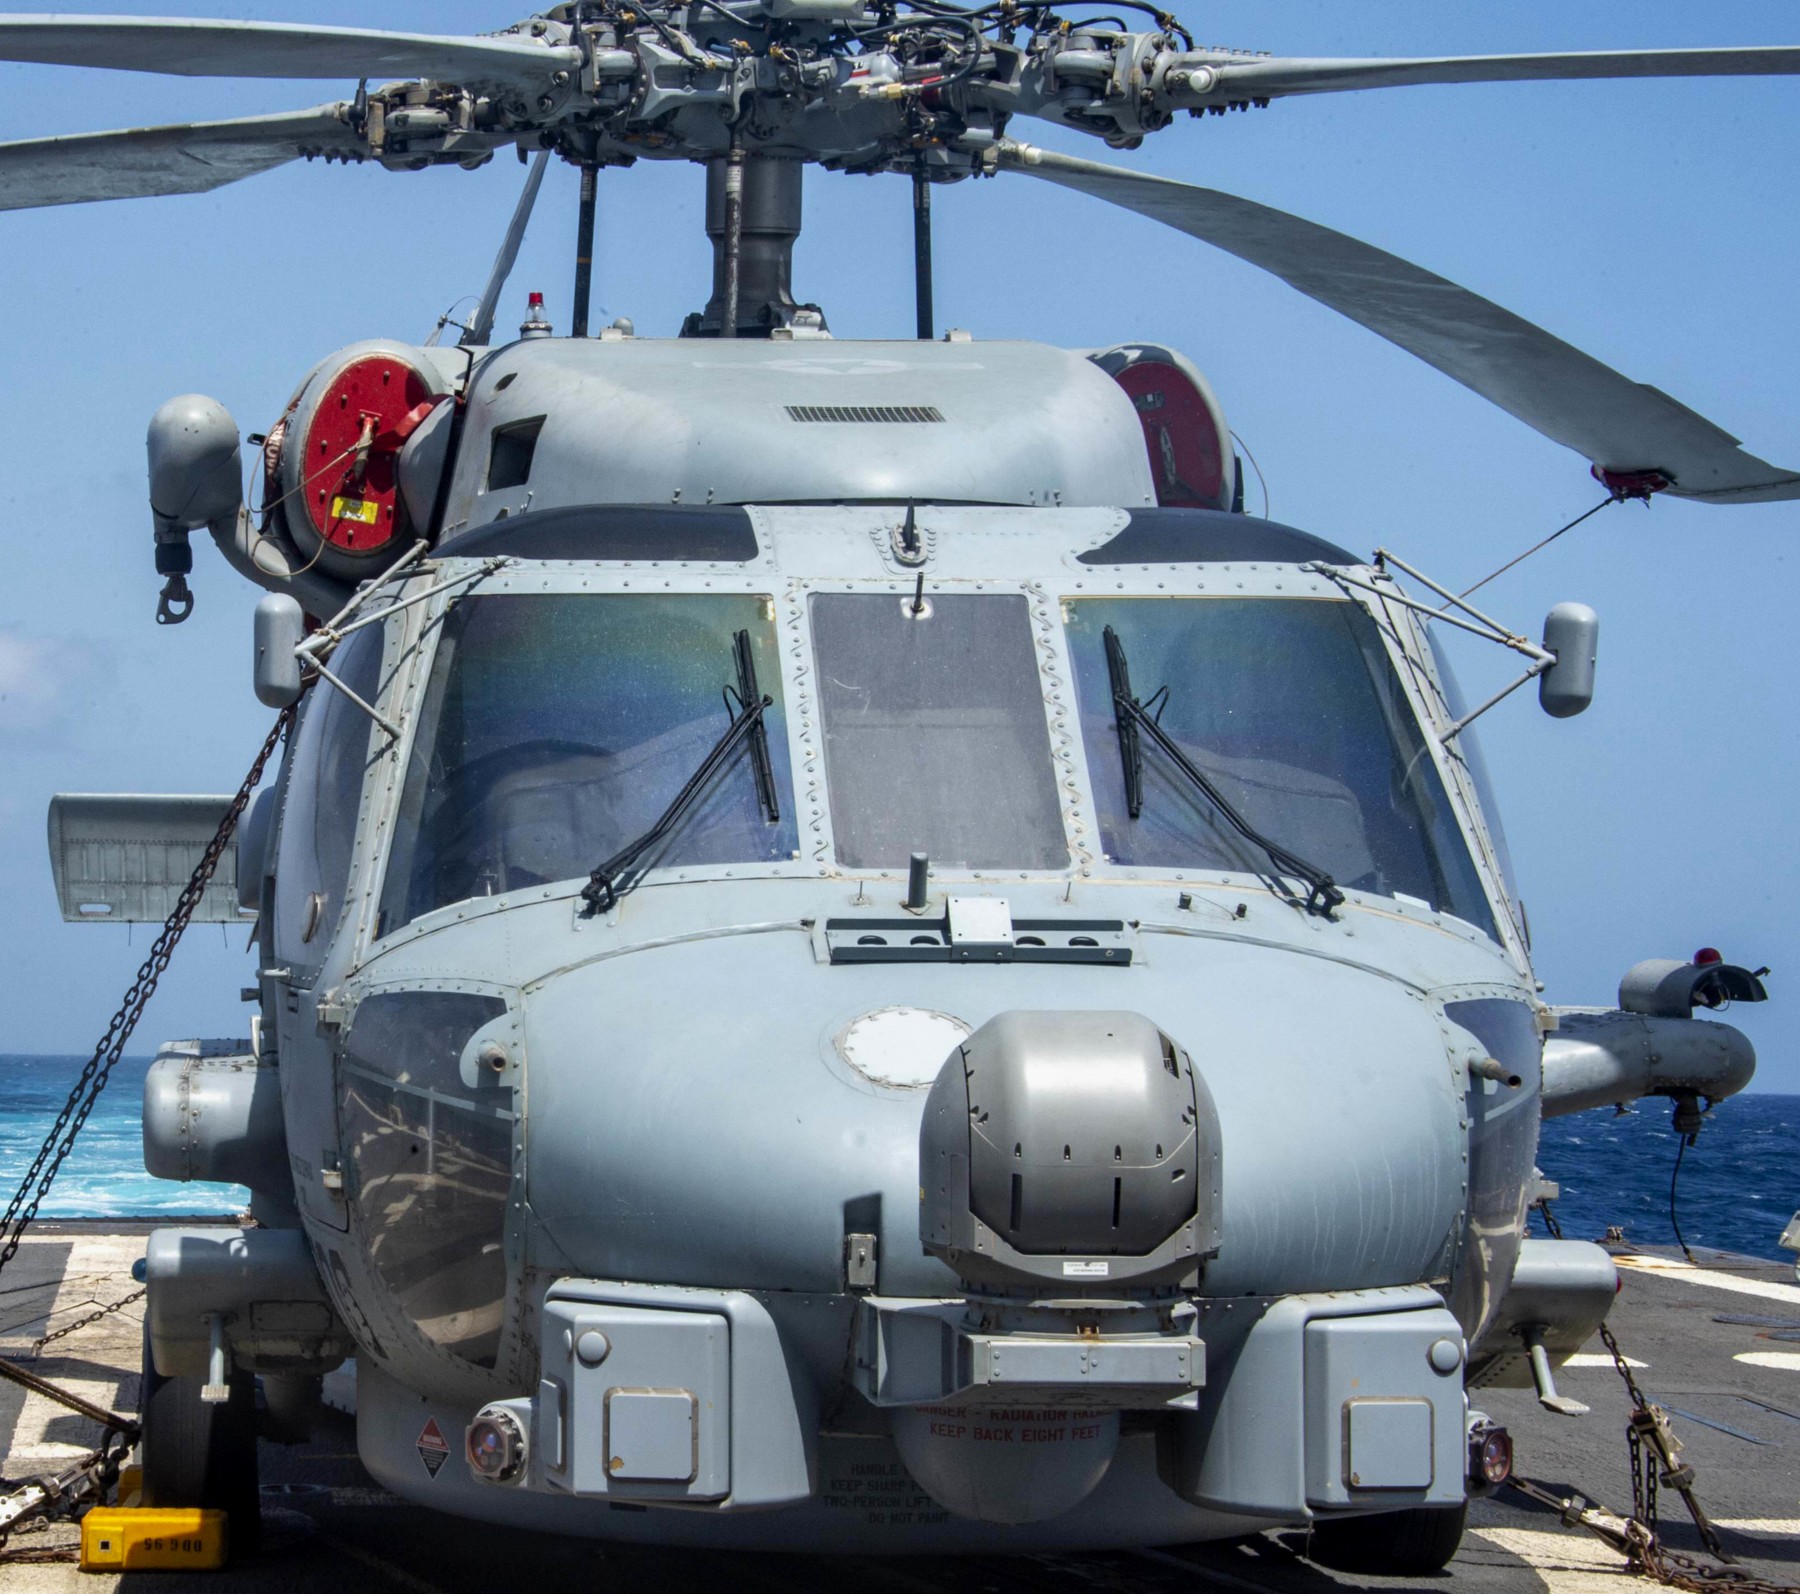 hsm-74 swamp foxes helicopter maritime strike squadron mh-60r seahawk ddg-95 uss james williams 92